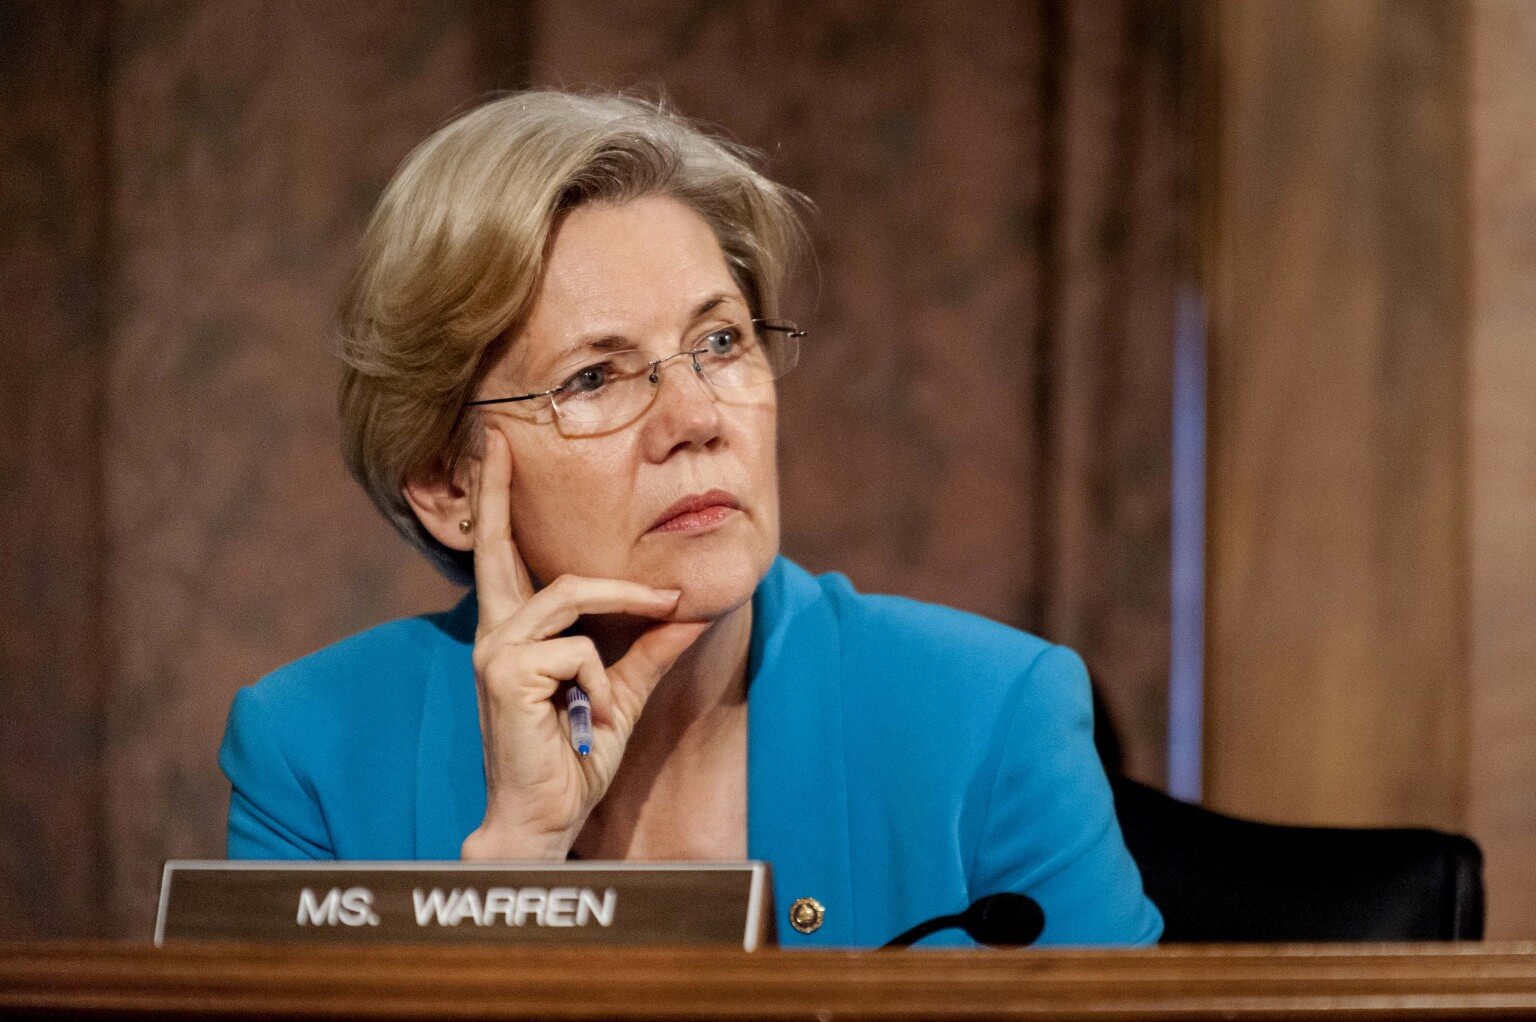 Senator Elizabeth Warren, a Democrat from Massachusetts, listens as Ben S. Bernanke, chairman of the U.S. Federal Reserve, not seen, answers a question during his semi-annual monetary policy report to the Senate Banking, Housing and Urban Affairs Committee during a hearing on Capitol Hill, in Washington, D.C., U.S., on Thursday, July 18, 2013. Bernanke said one reason for the recent rise in long-term interest rates is the unwinding of leveraged and "excessively risky" investing. Photographer: Pete Marovich/Bloomberg via Getty Images